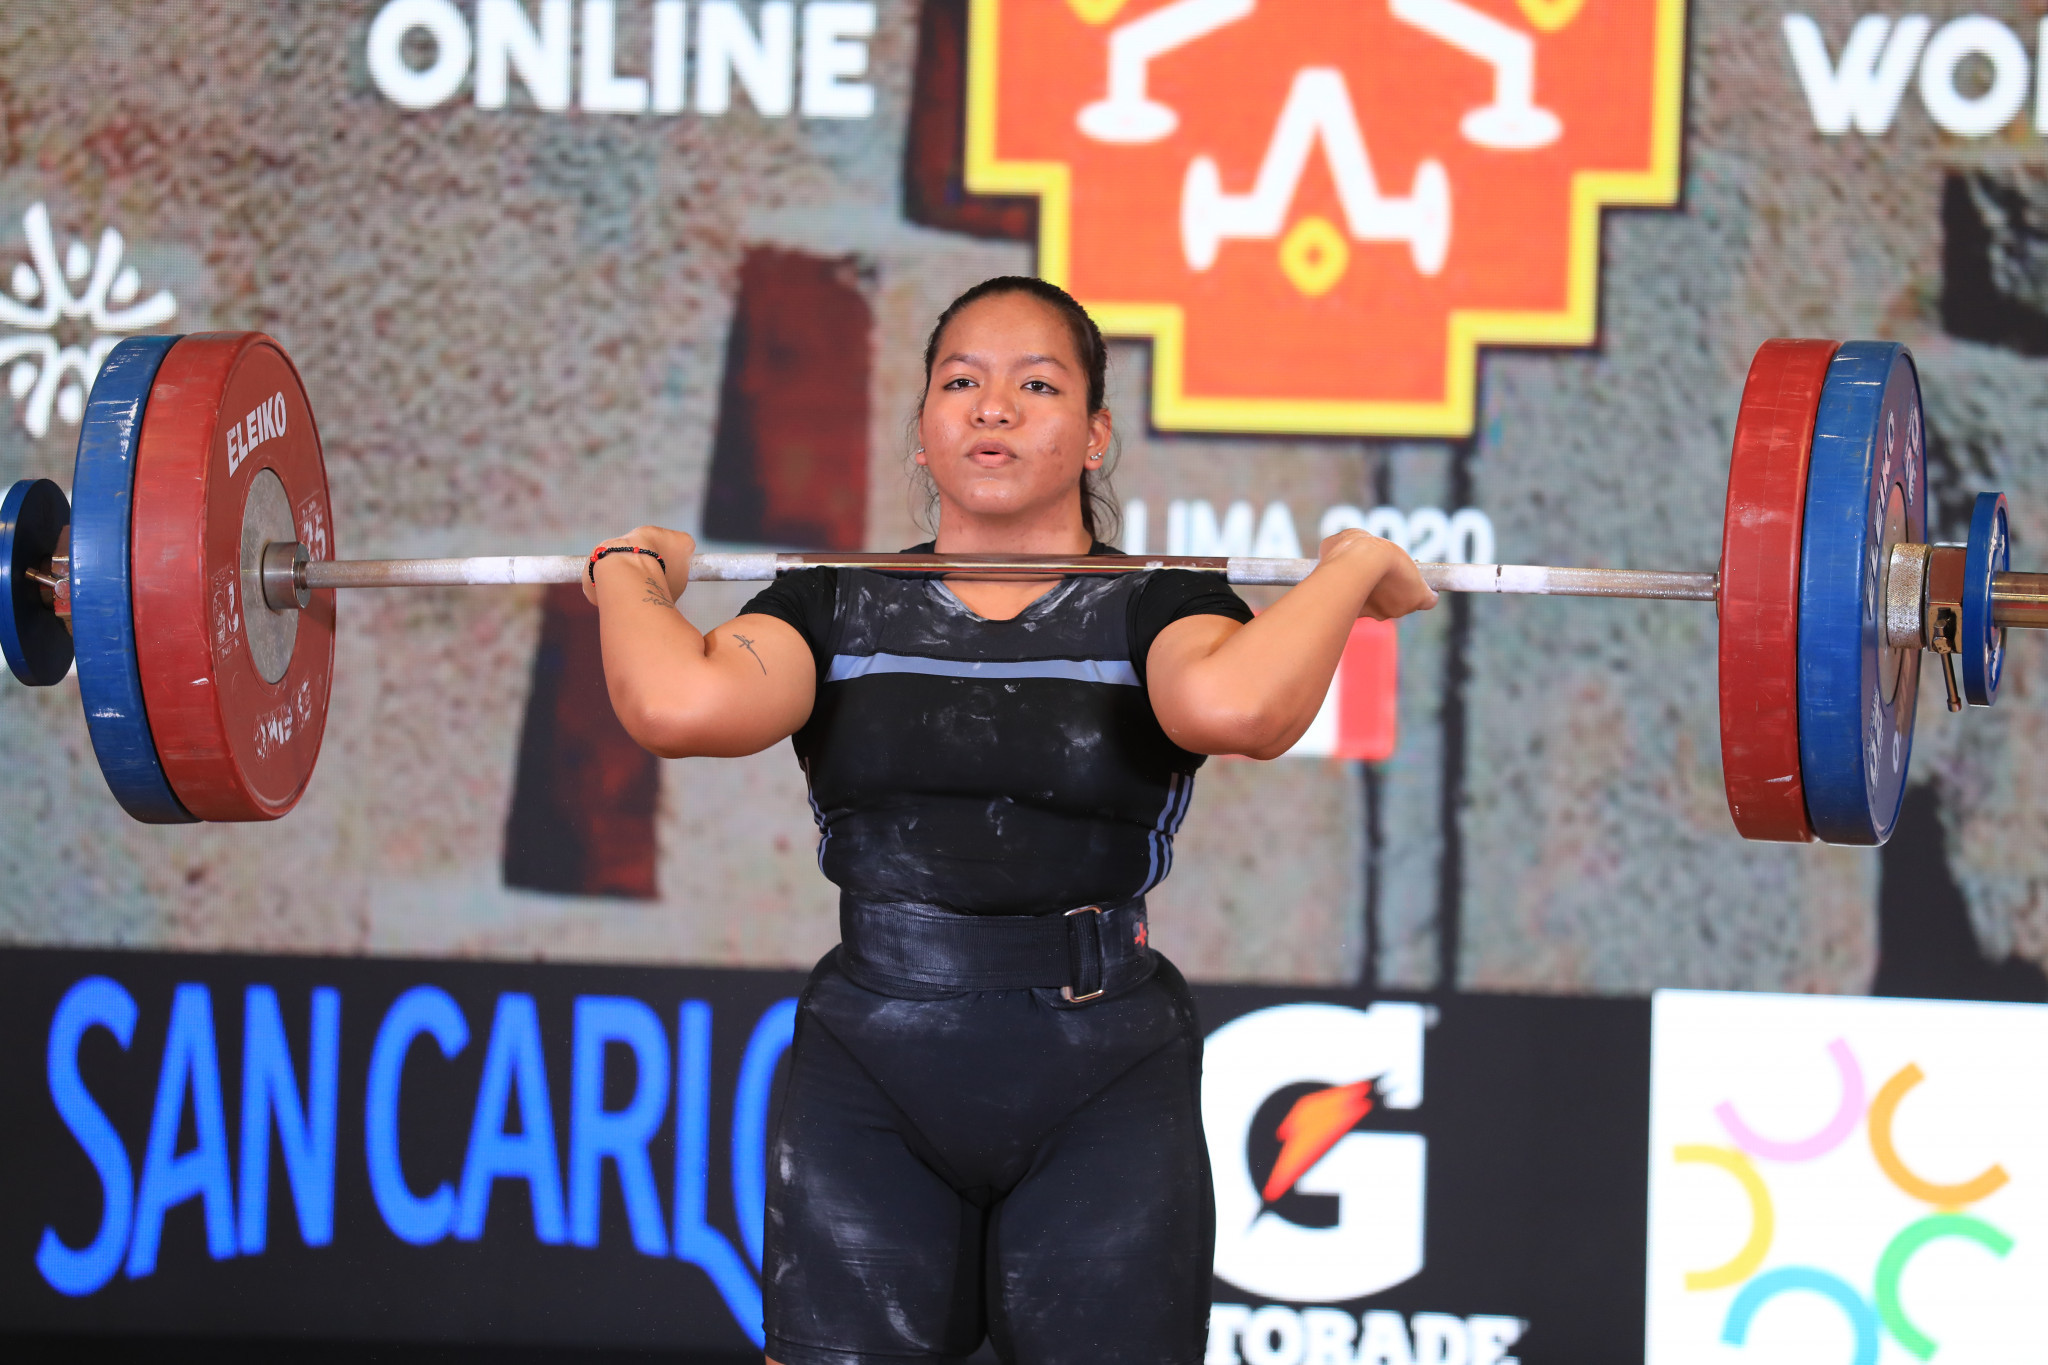 Peru finish top of IWF Online Youth World Cup standings after Saldarriaga success